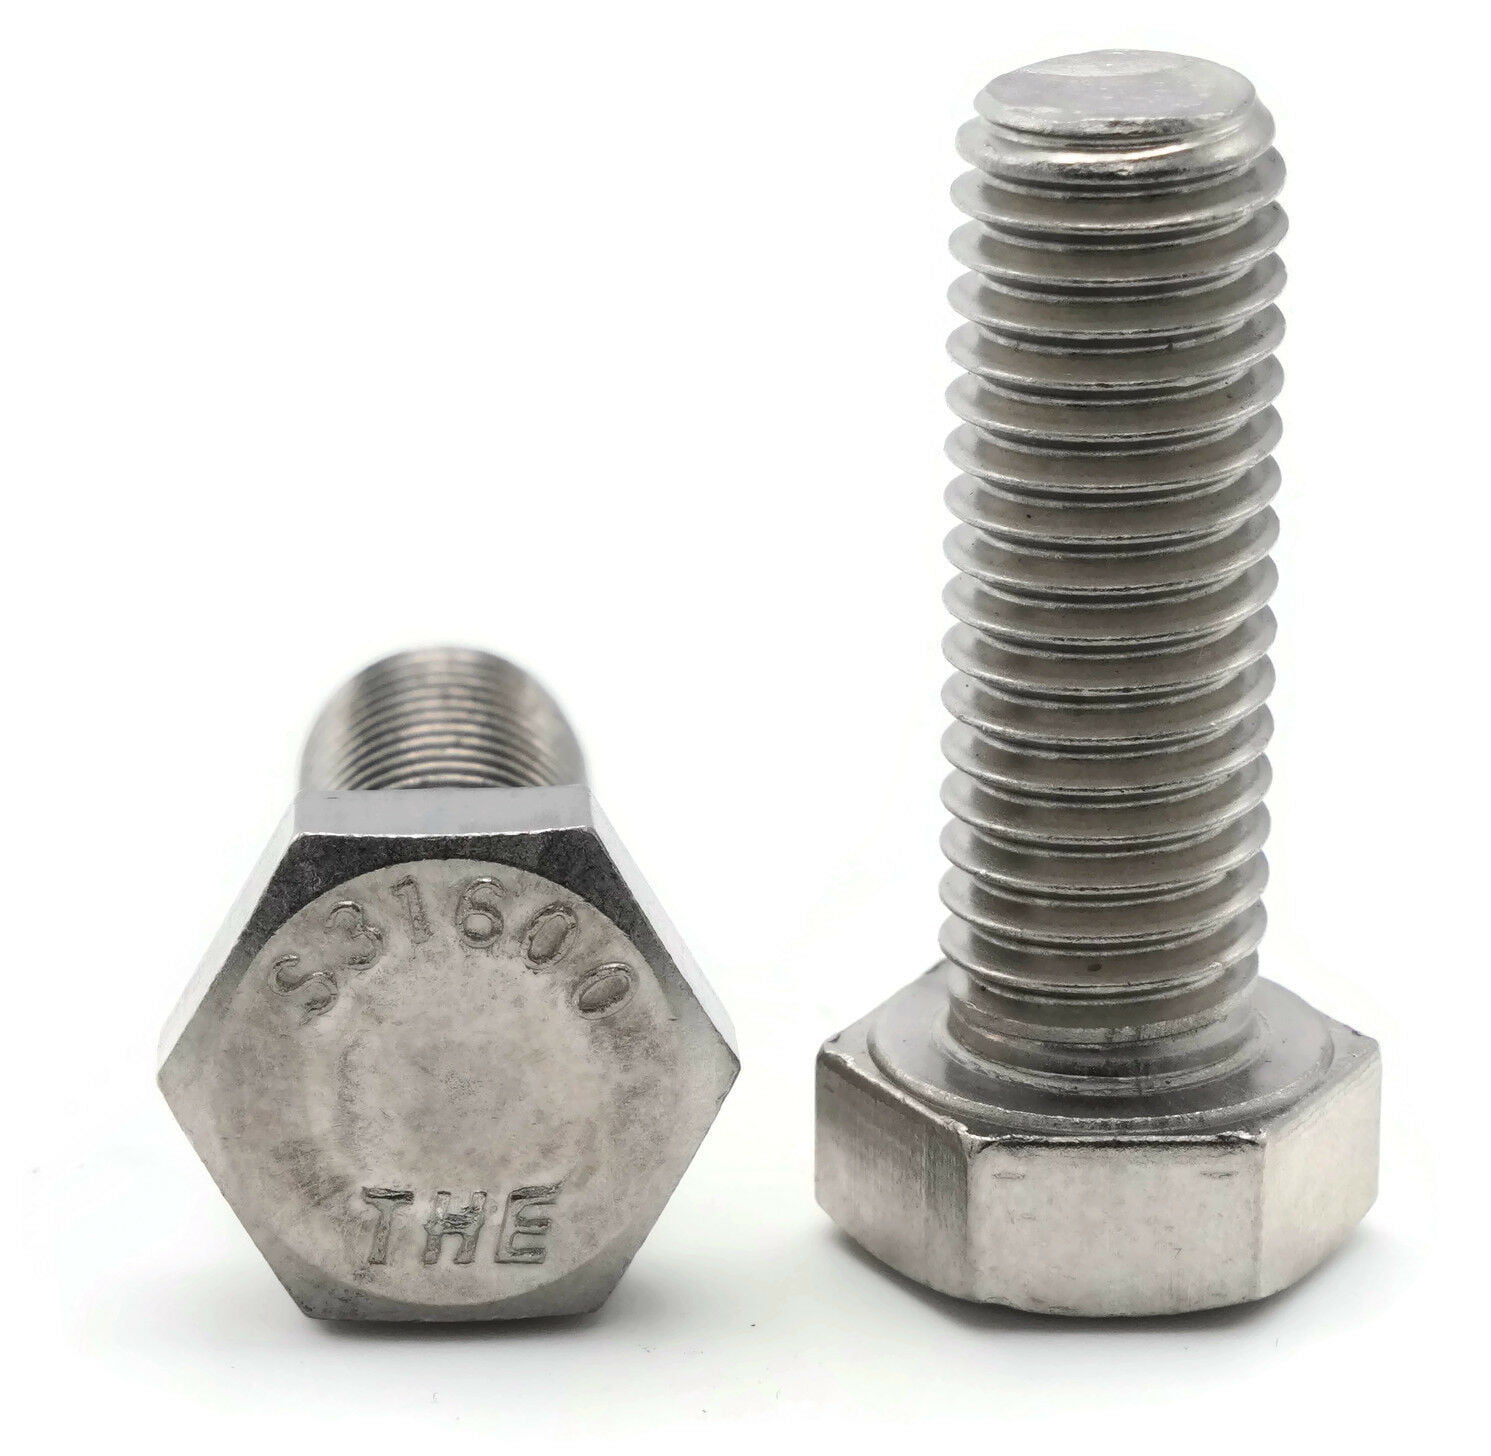 Hex Cap Screws QTY 100 7/16"-20 Hex Head Bolts Stainless Steel 